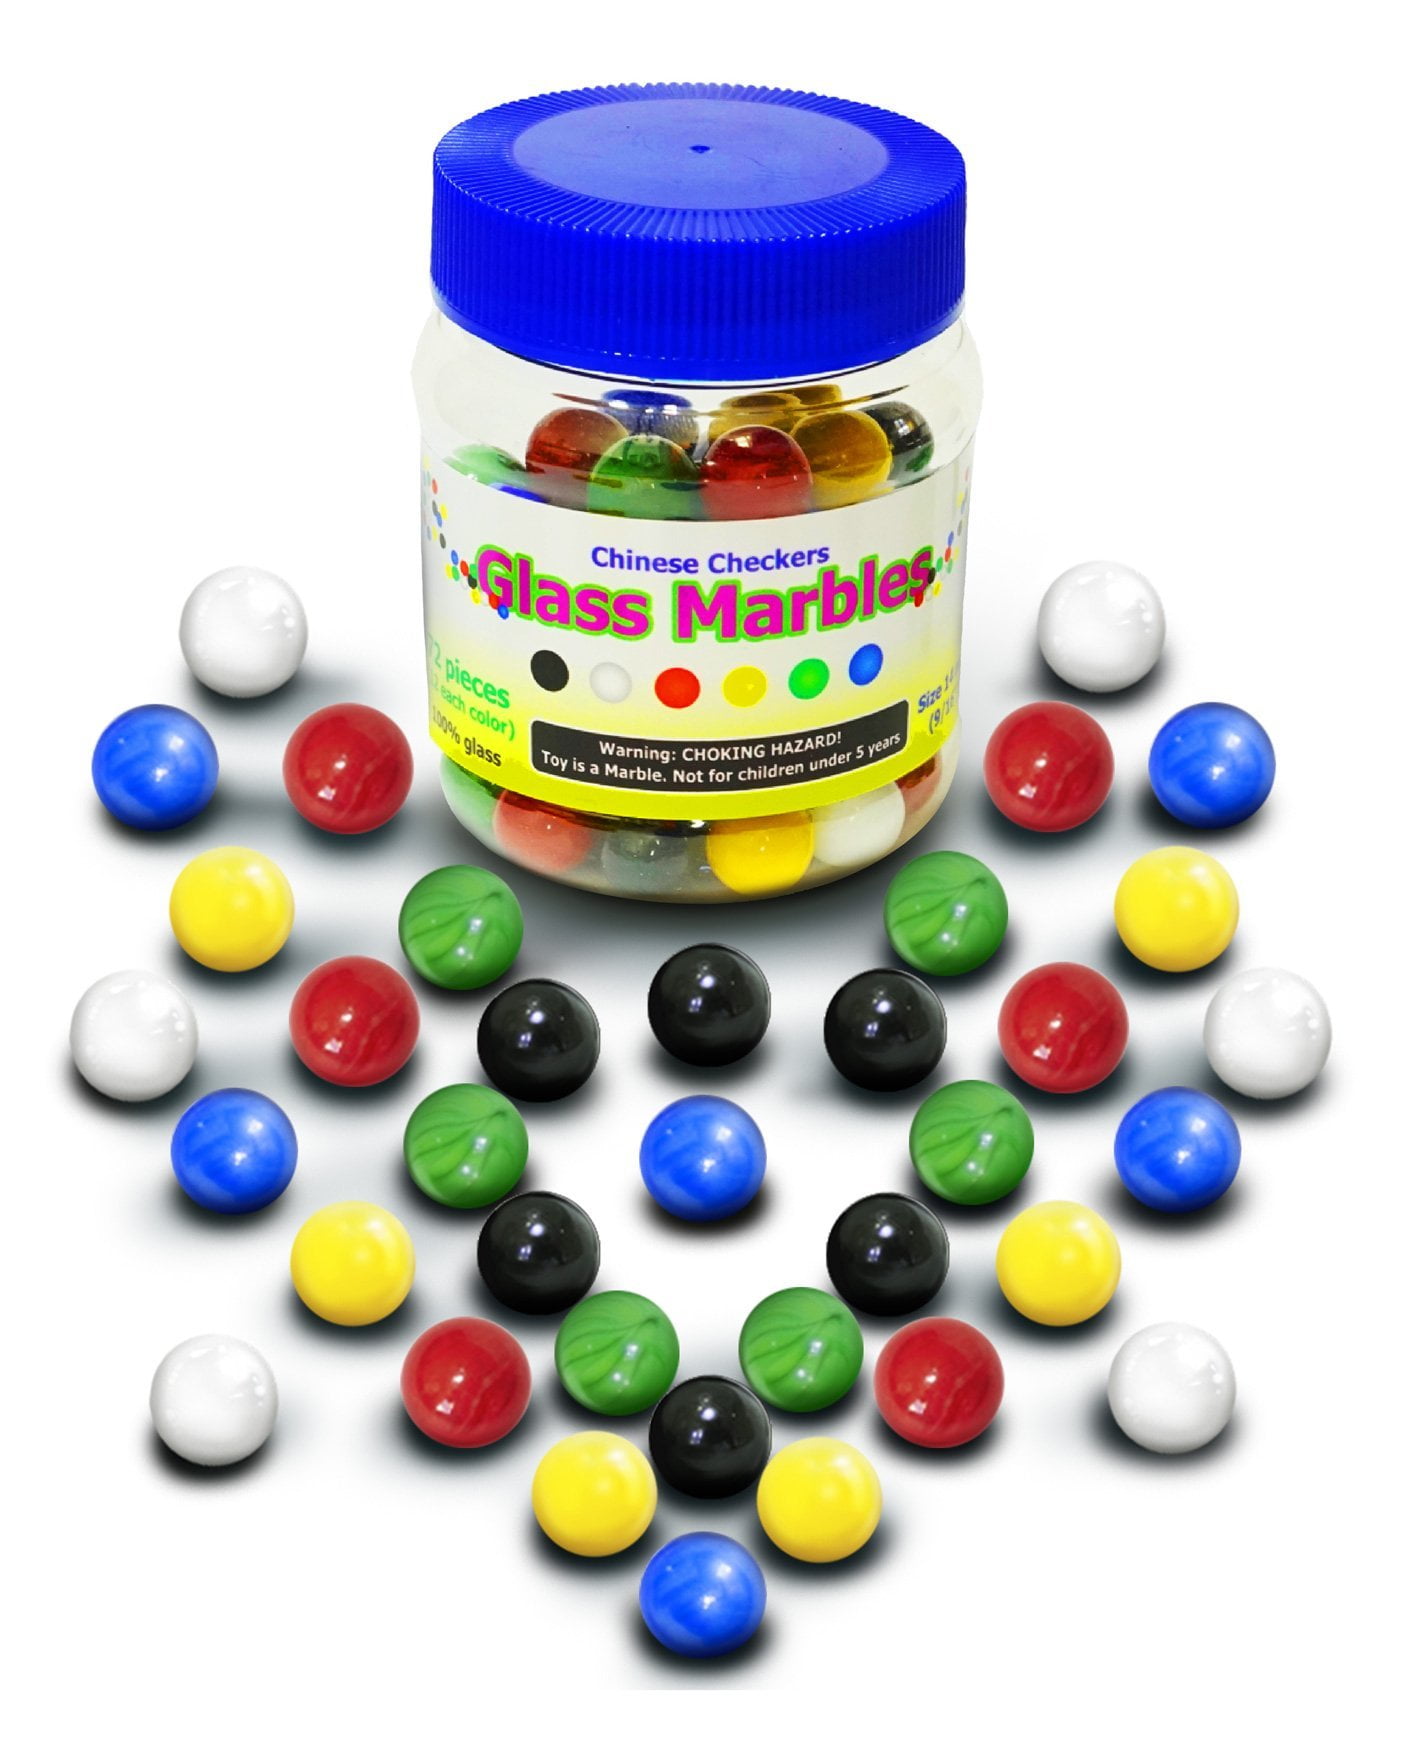 14mm Set of 72 Renewed 12 each Color with Practical Container. Size 9/16” Super Value Depot Chinese Checkers Glass Marbles 